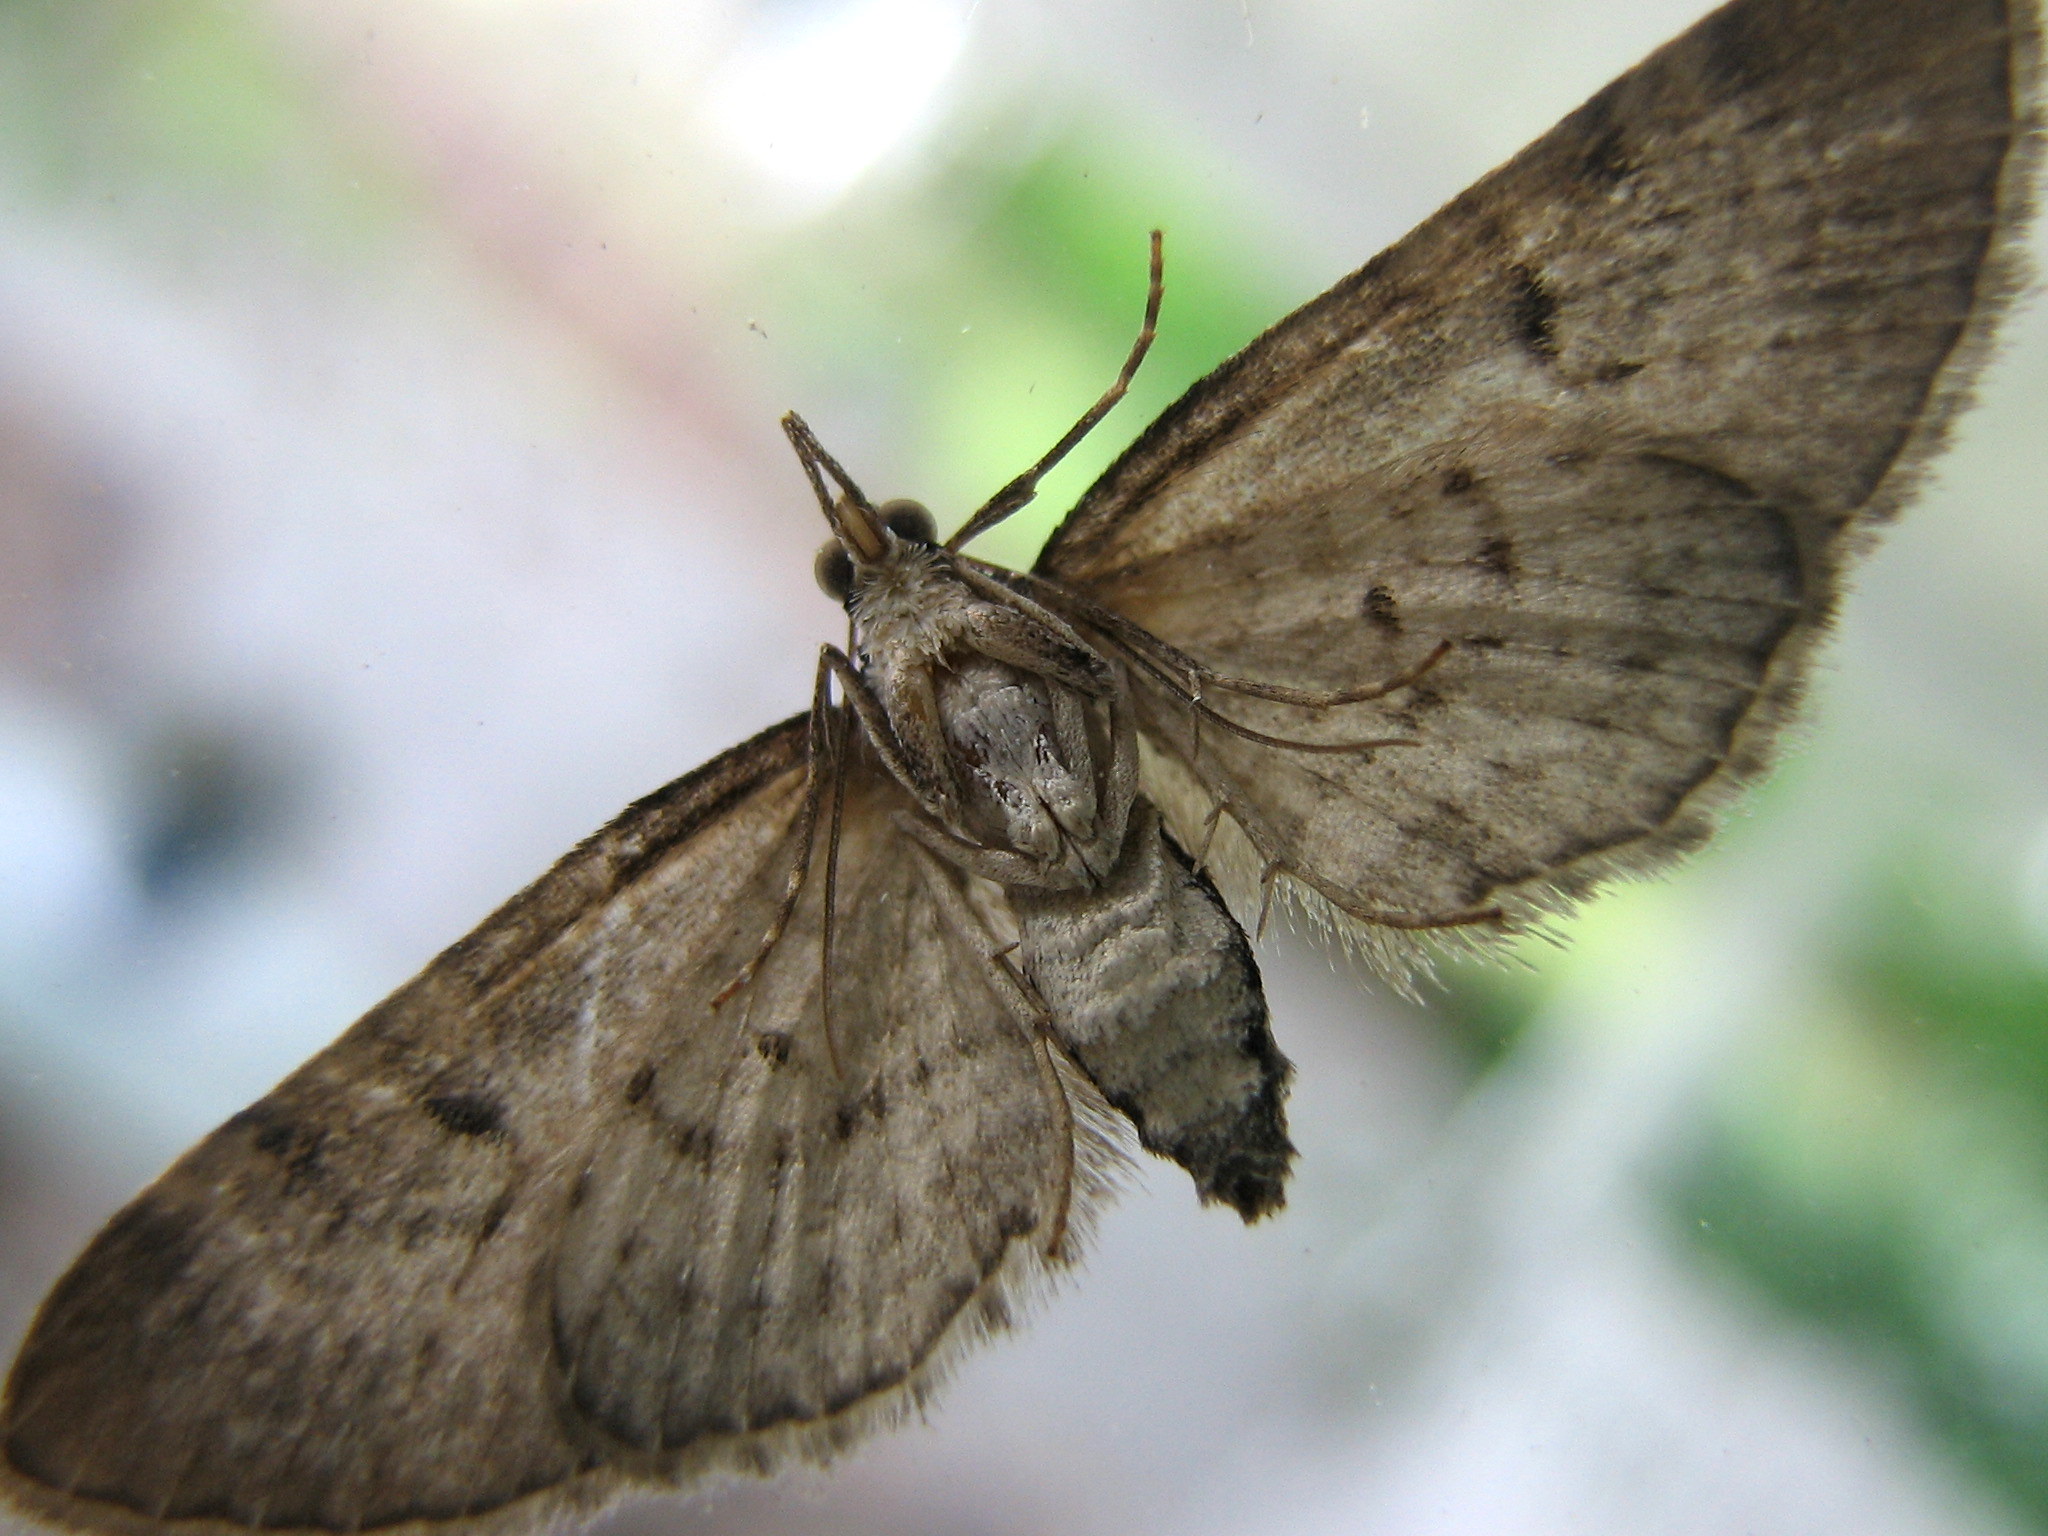 close up picture of an moths wings showing on a window